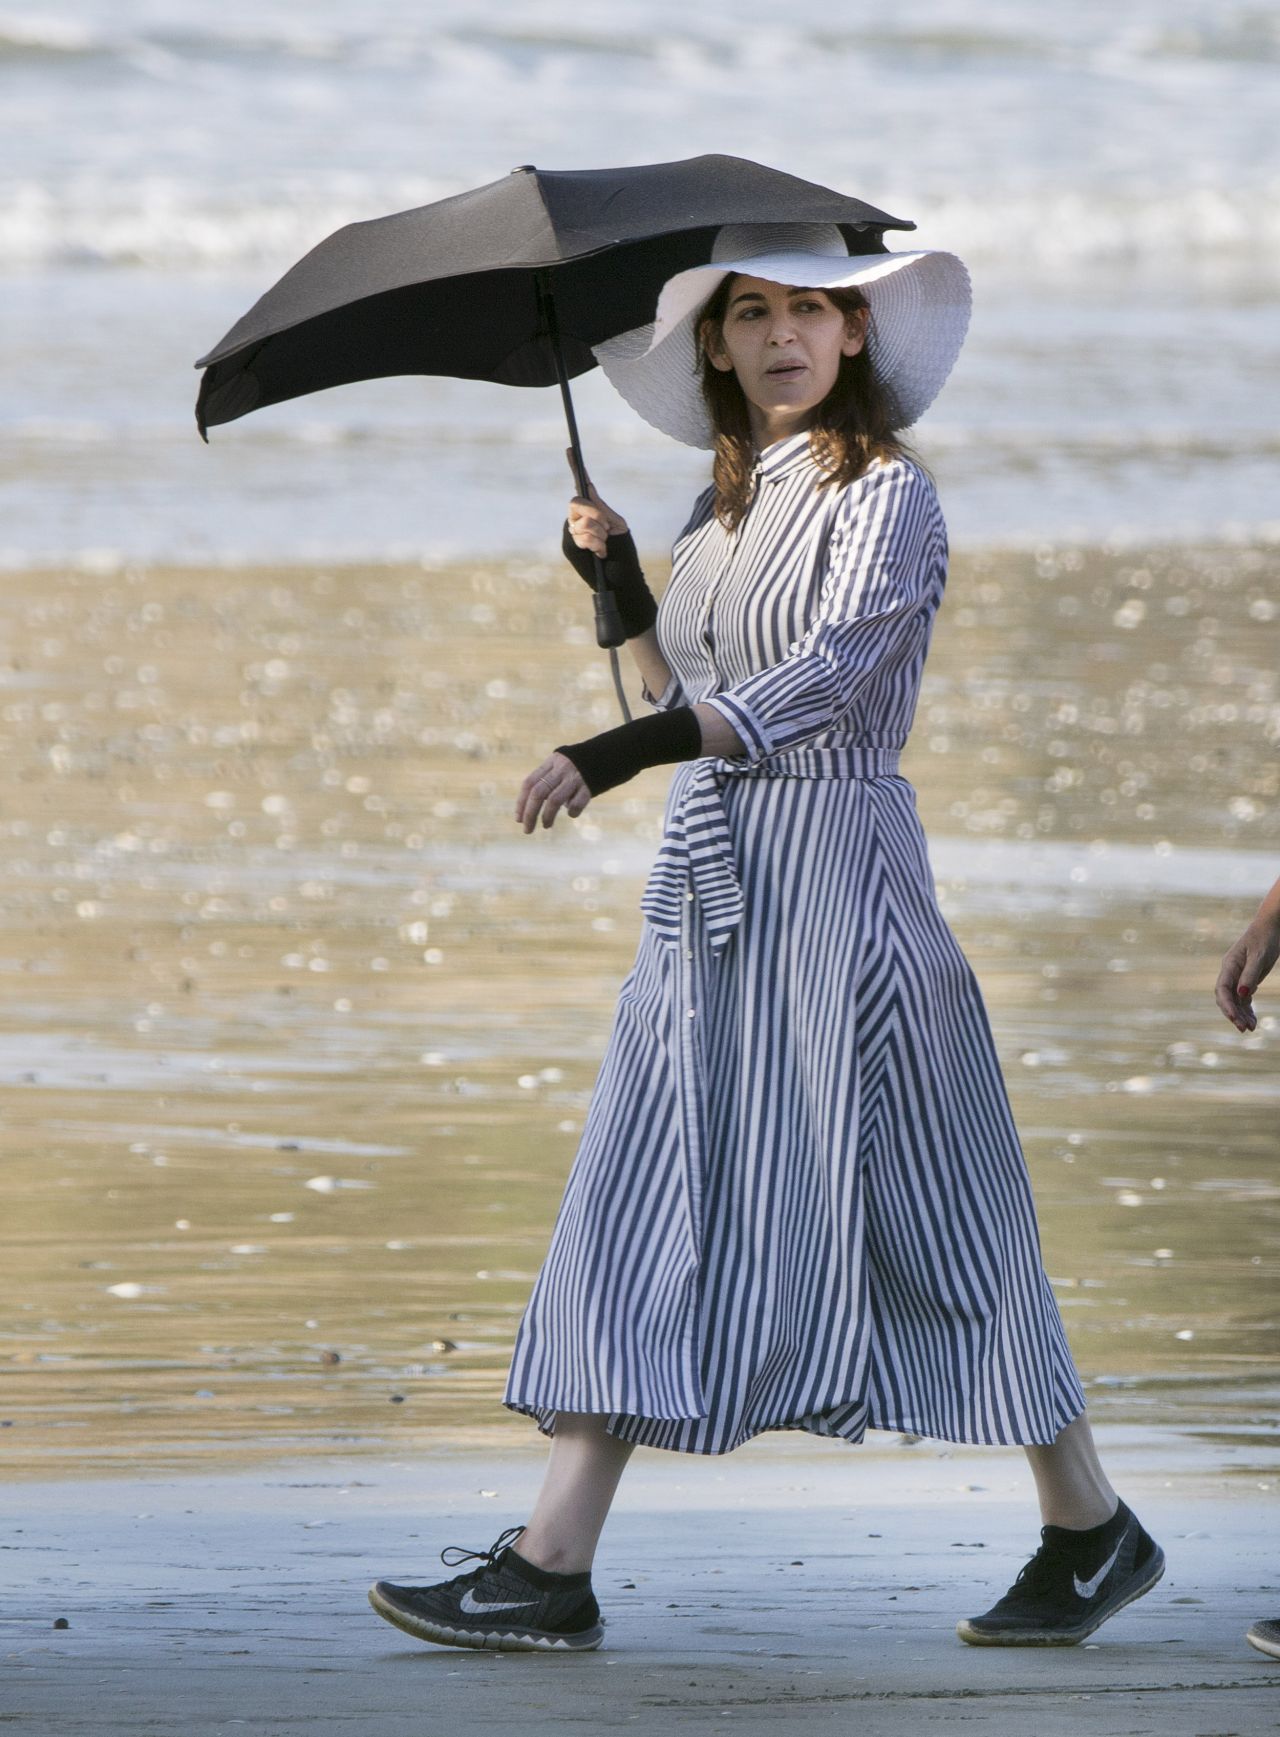 Nigella Lawson Covers Up On A Sunny Day At The Beach In Auckland